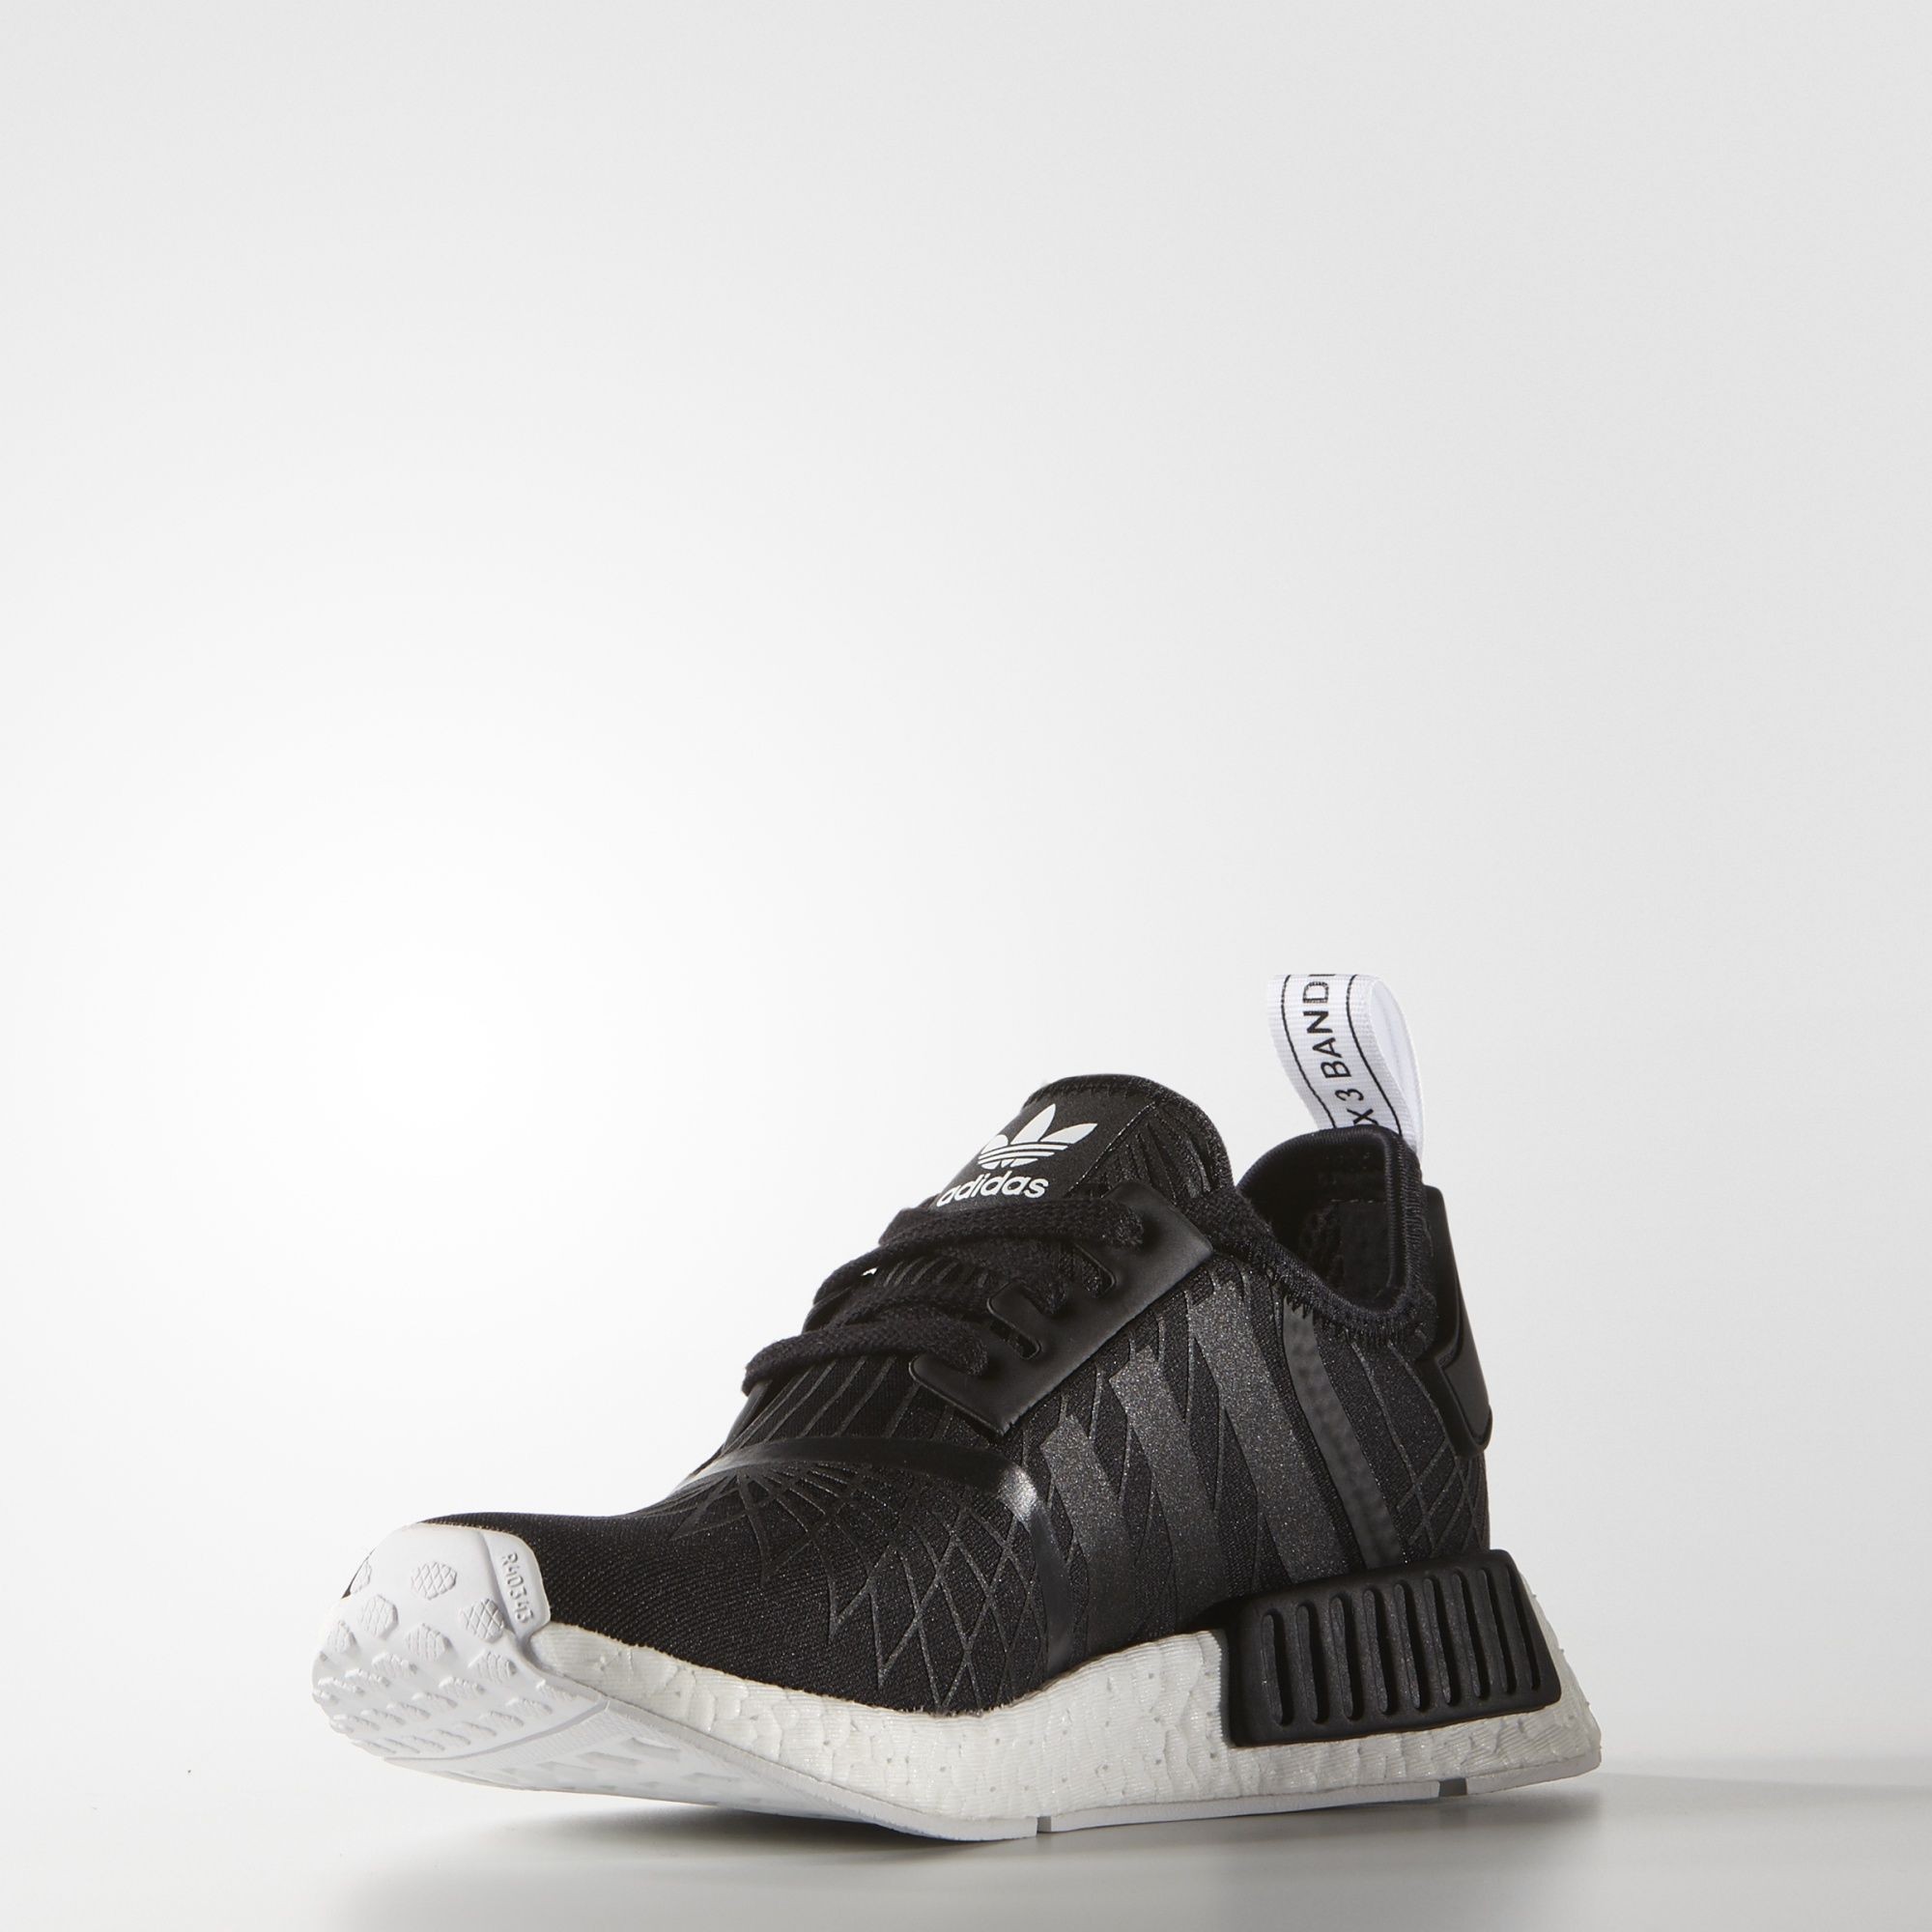 adidas nmd homme pas cher